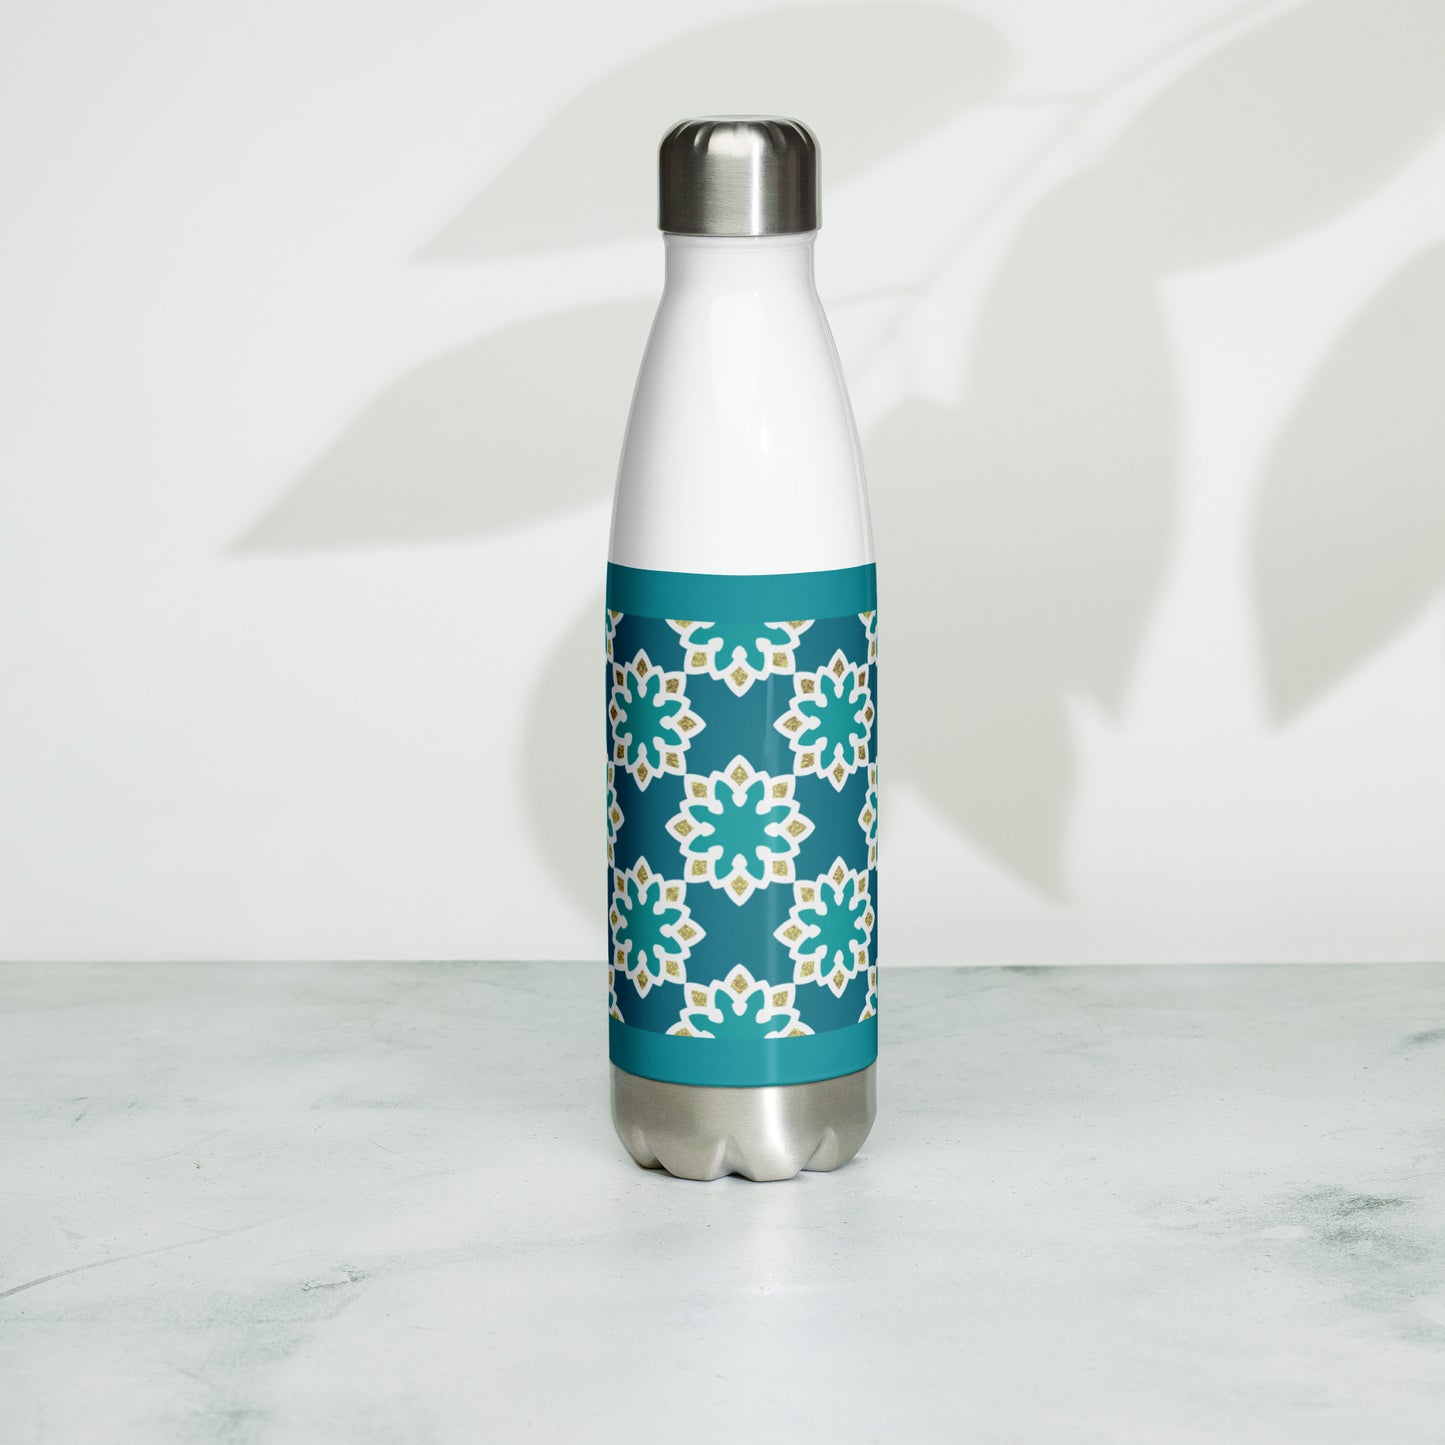 Stainless Steel Water Bottle - Arabesque Flower in Aqua and Gold